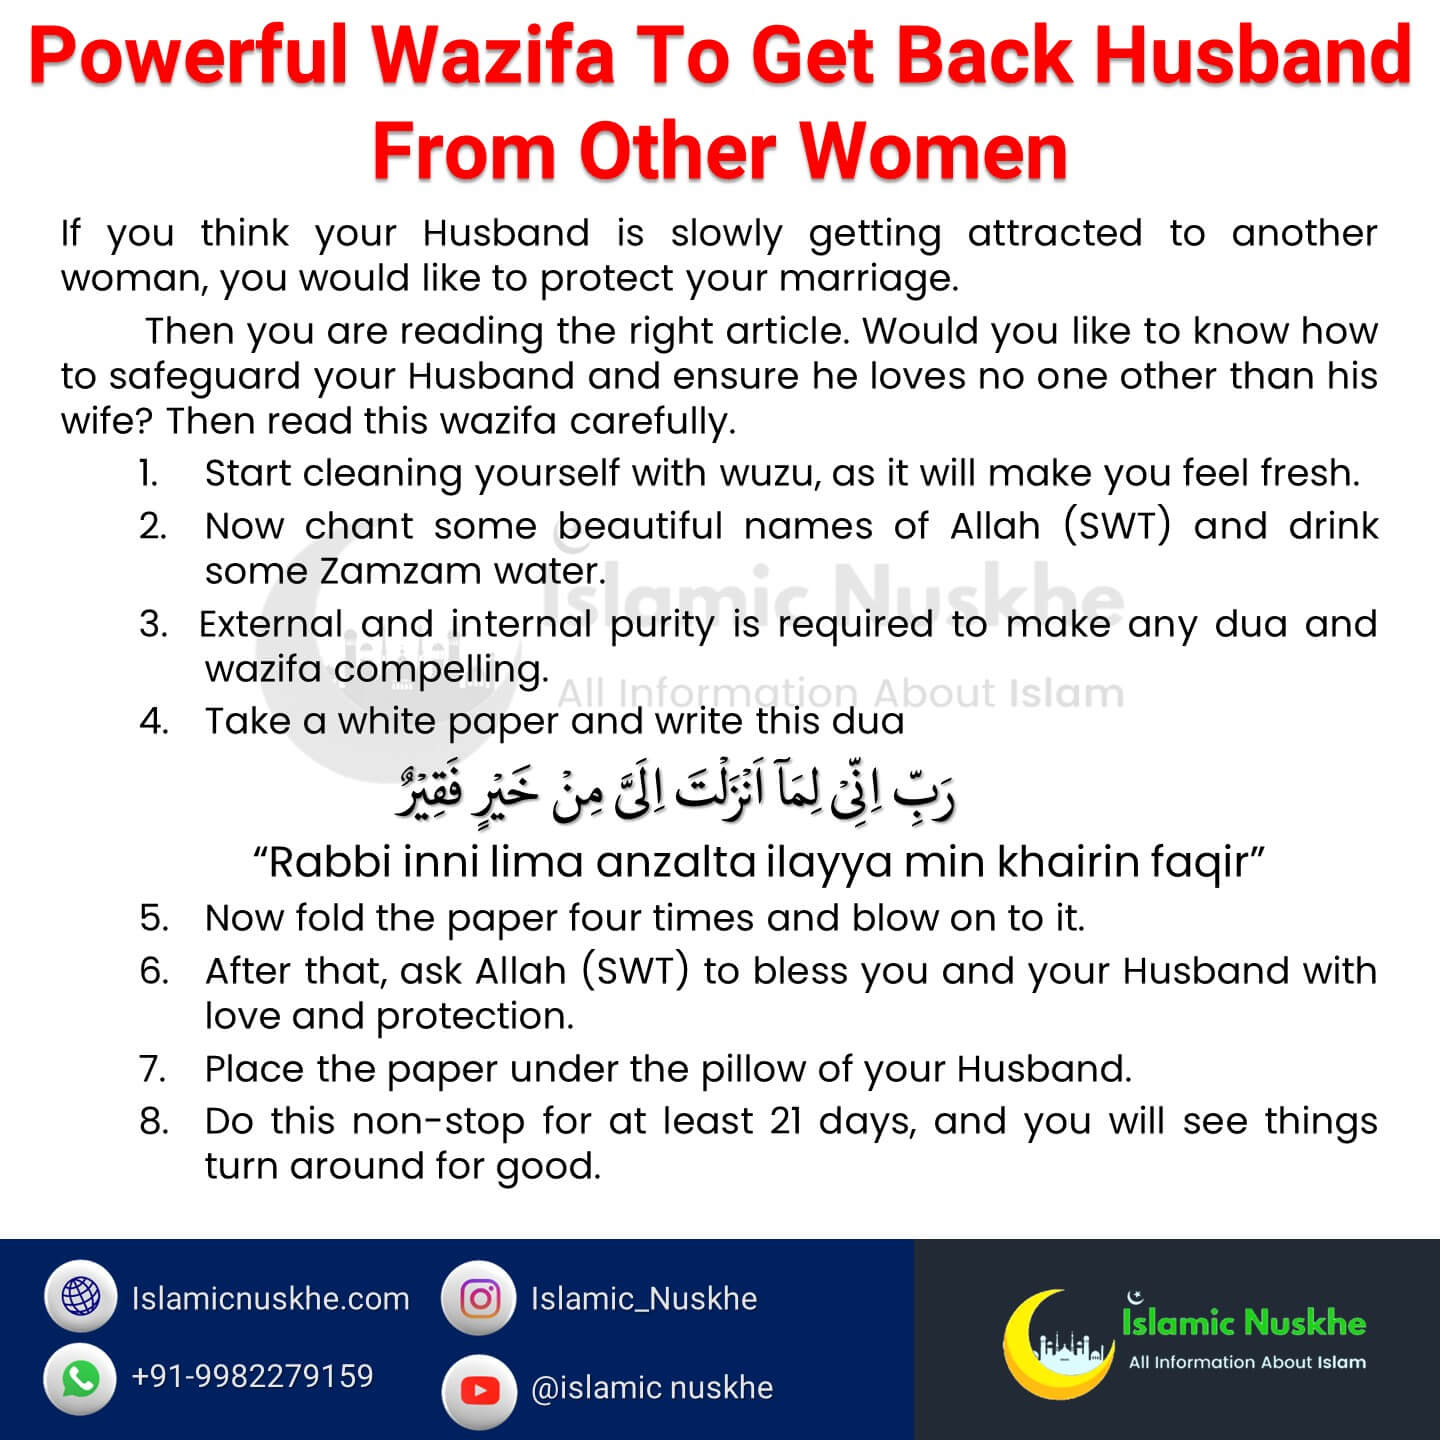 Powerful Wazifa To Get Back Husband From Other Women